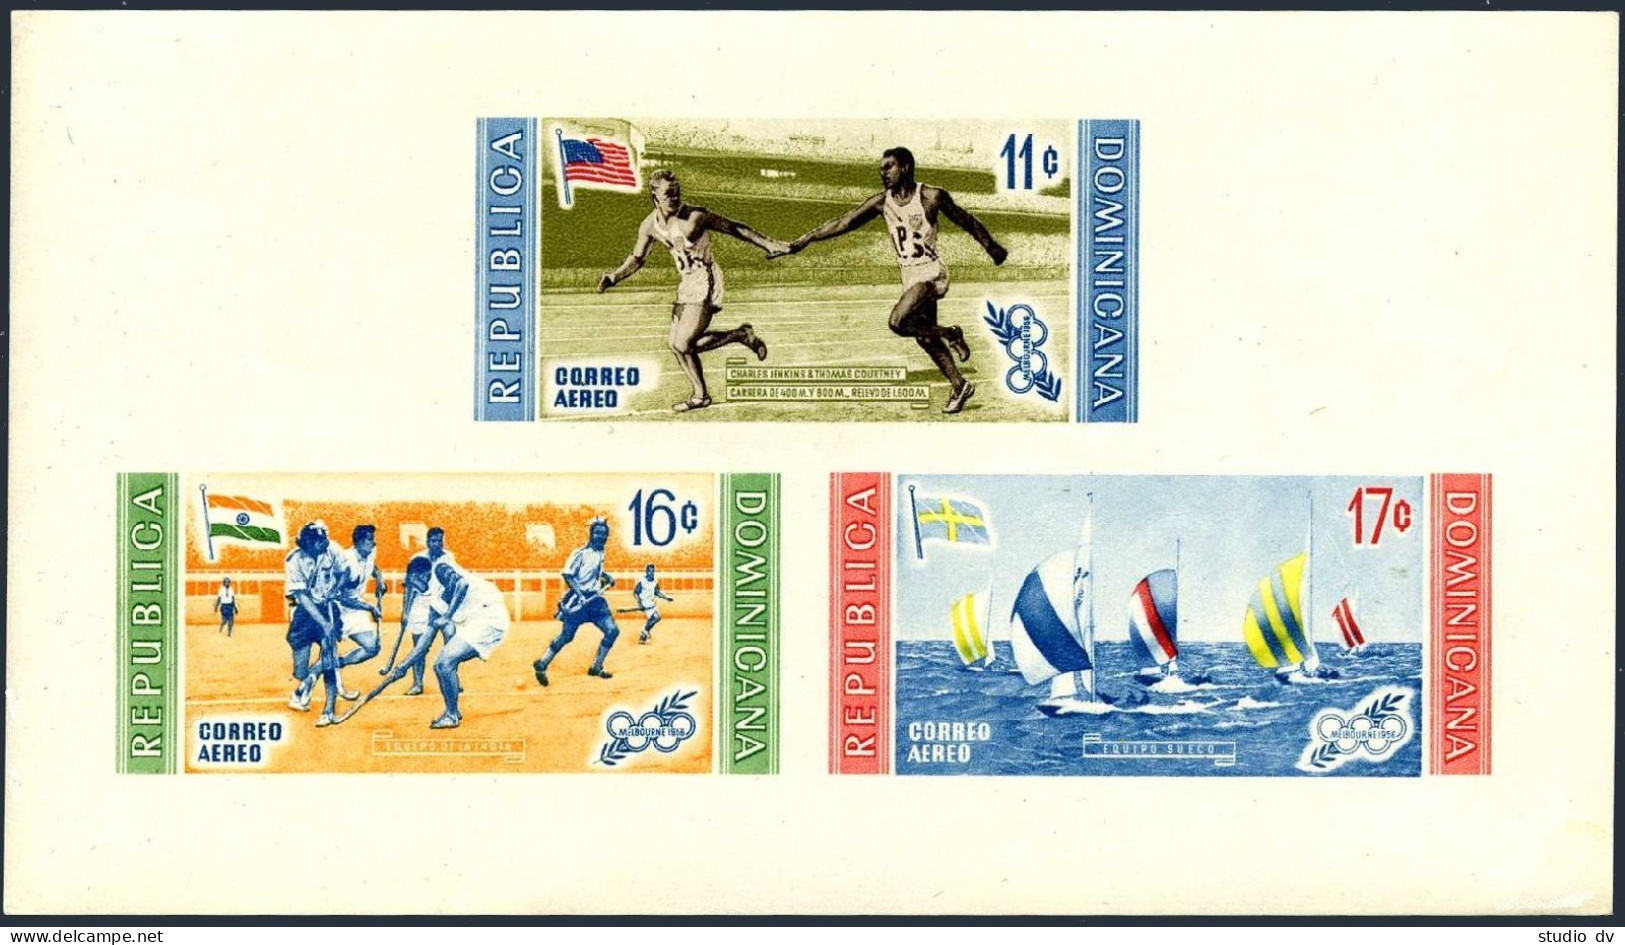 Dominican Rep 505a,C108a Imperf Sheets,MNH.Olympics Melbourne-1956.Winners,flags - Dominikanische Rep.